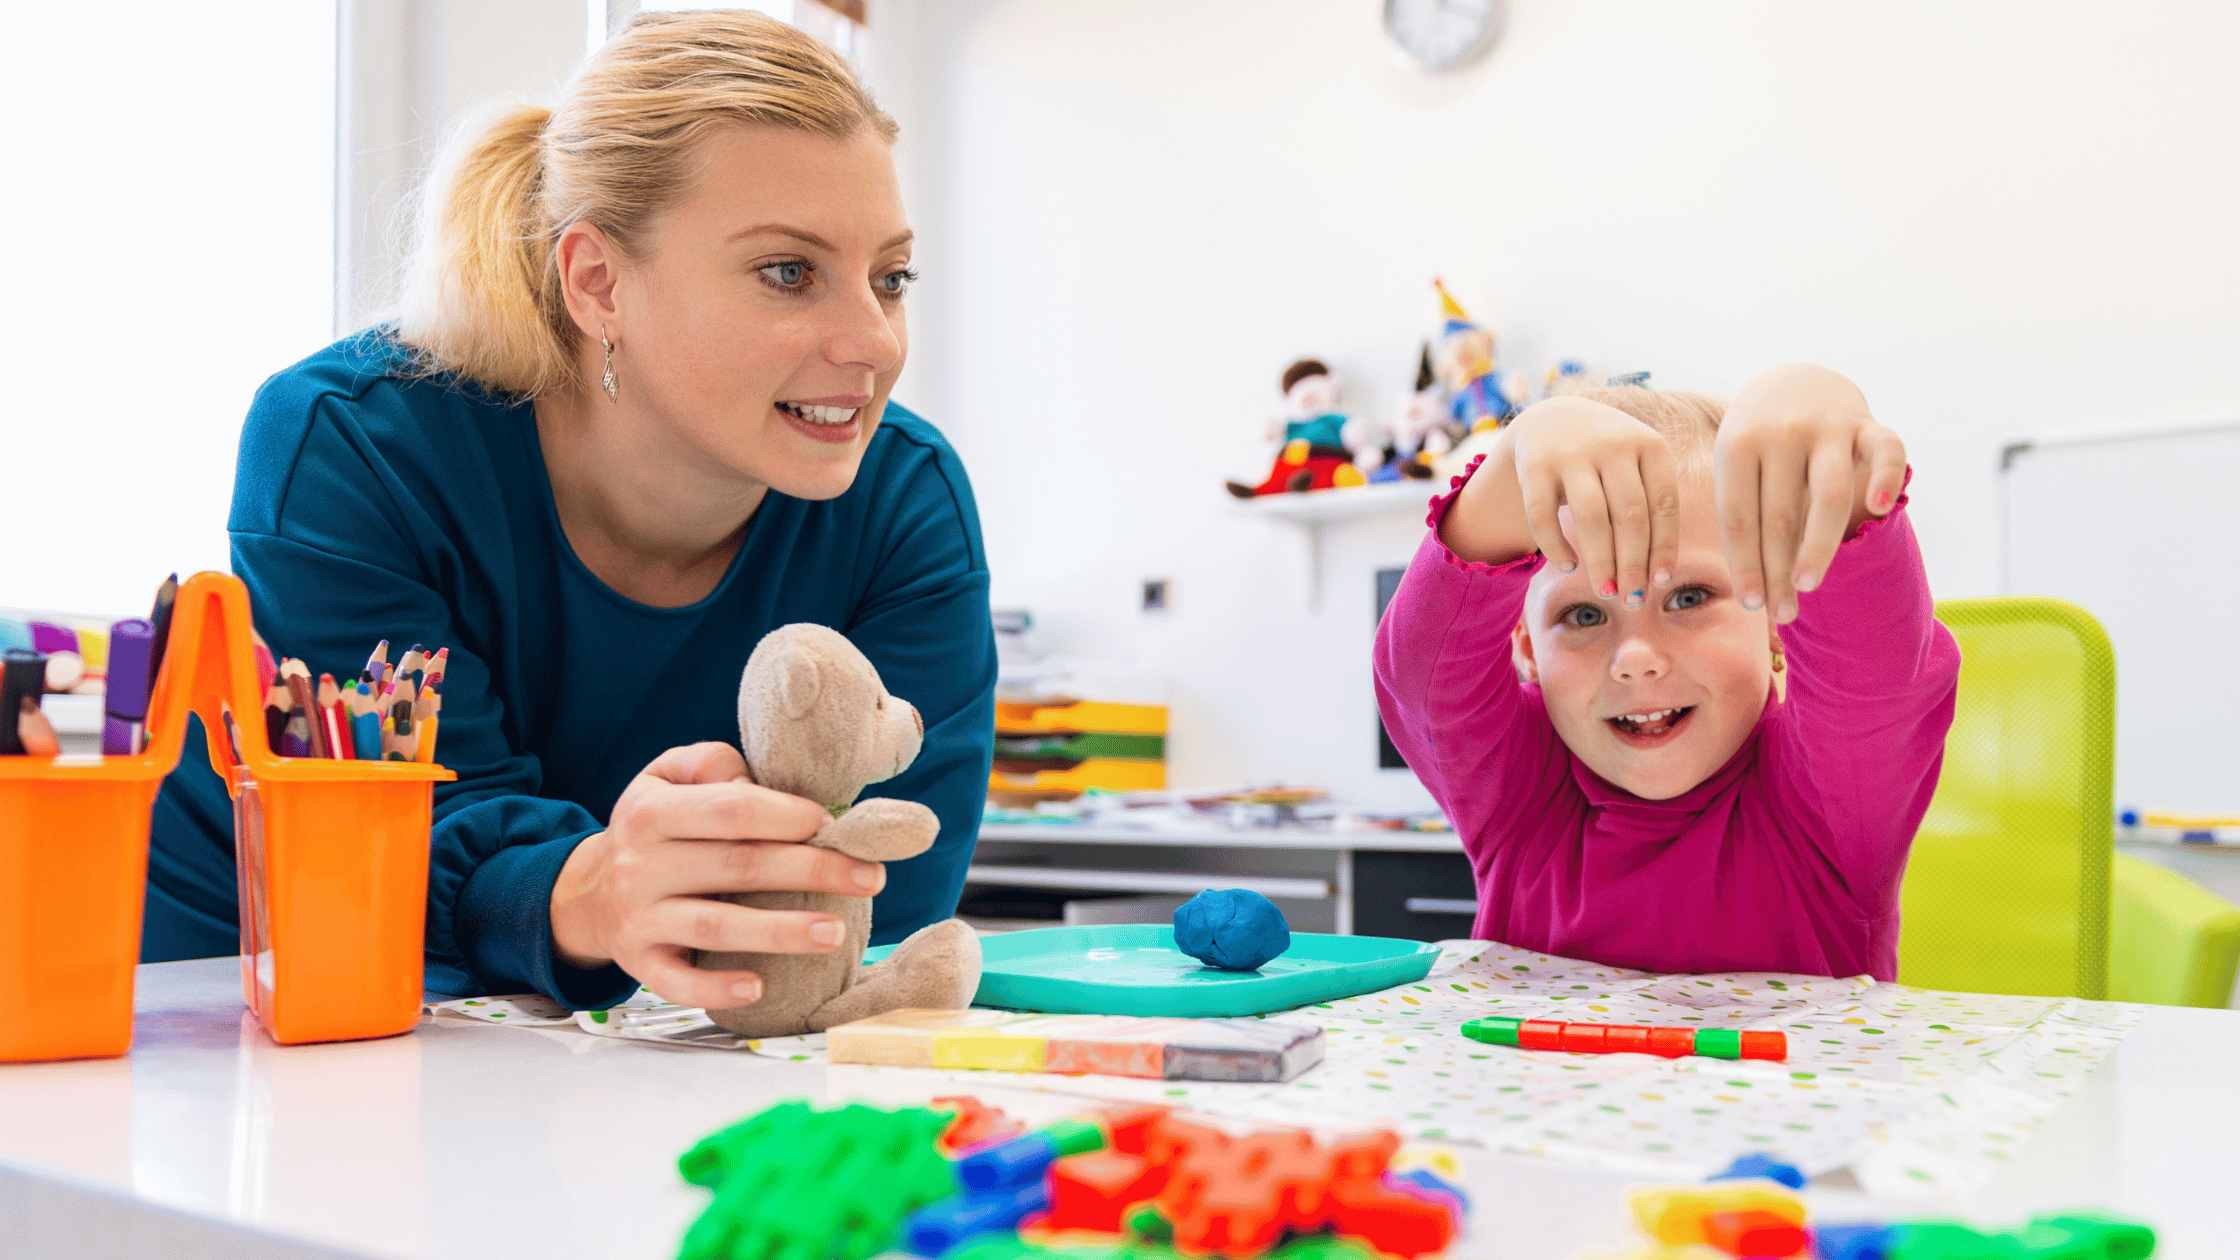 Occupational Therapy Plans for Children With Autism - Hope Center